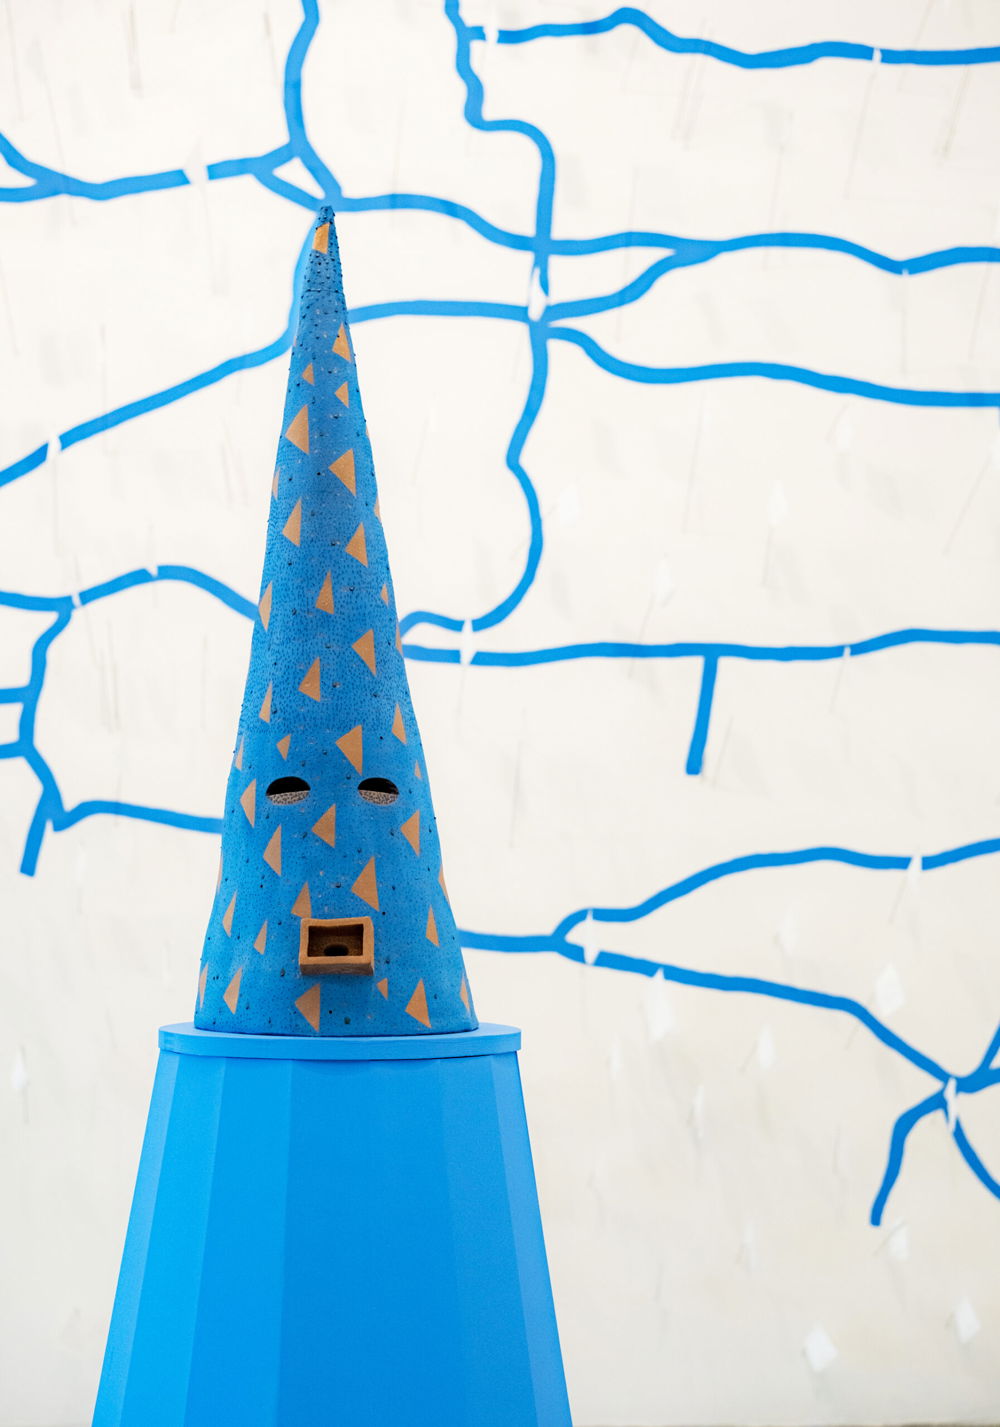 A ceramic cone sculpture that has its base resting on a medium blue pedestal. The sculpture has also been painted a medium blue with dark-blue dots and warm-brown triangles. Towards the base of the cone are two eye-shaped holes and a square-like mouth protruding outward.